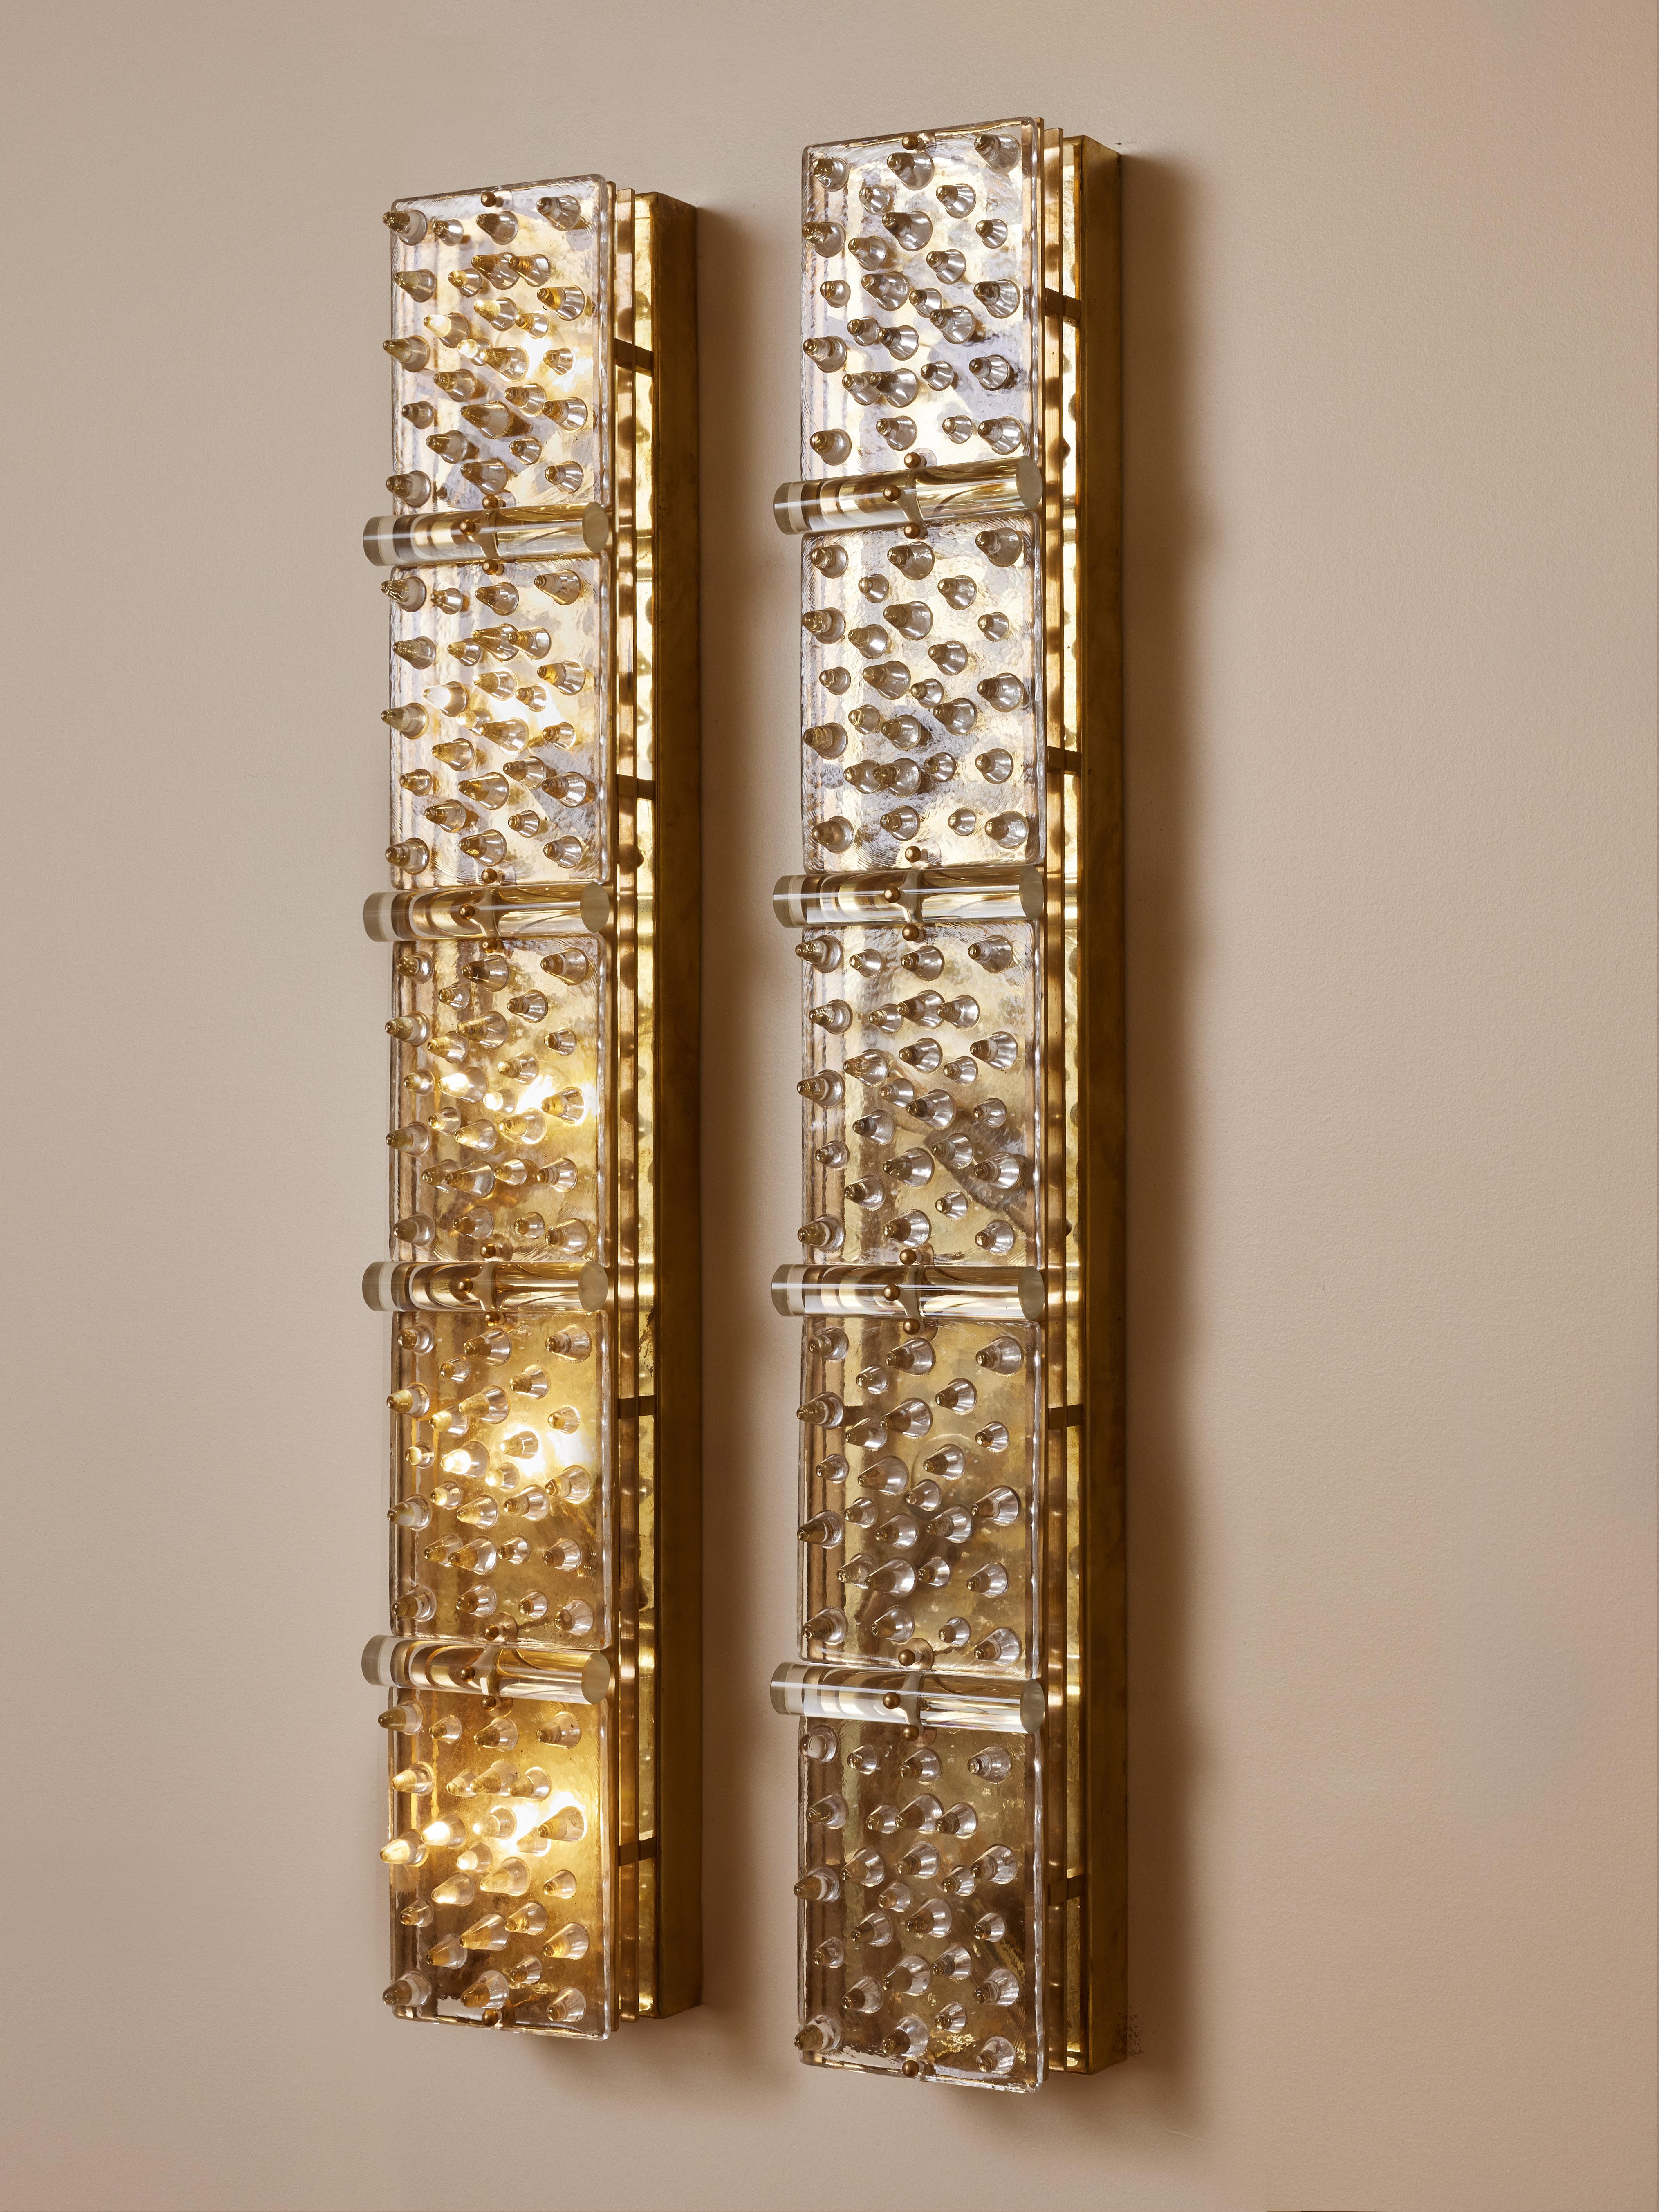 Pair of long sconces in brass and sculpted Murano glass.
Creation by Studio Glustin.